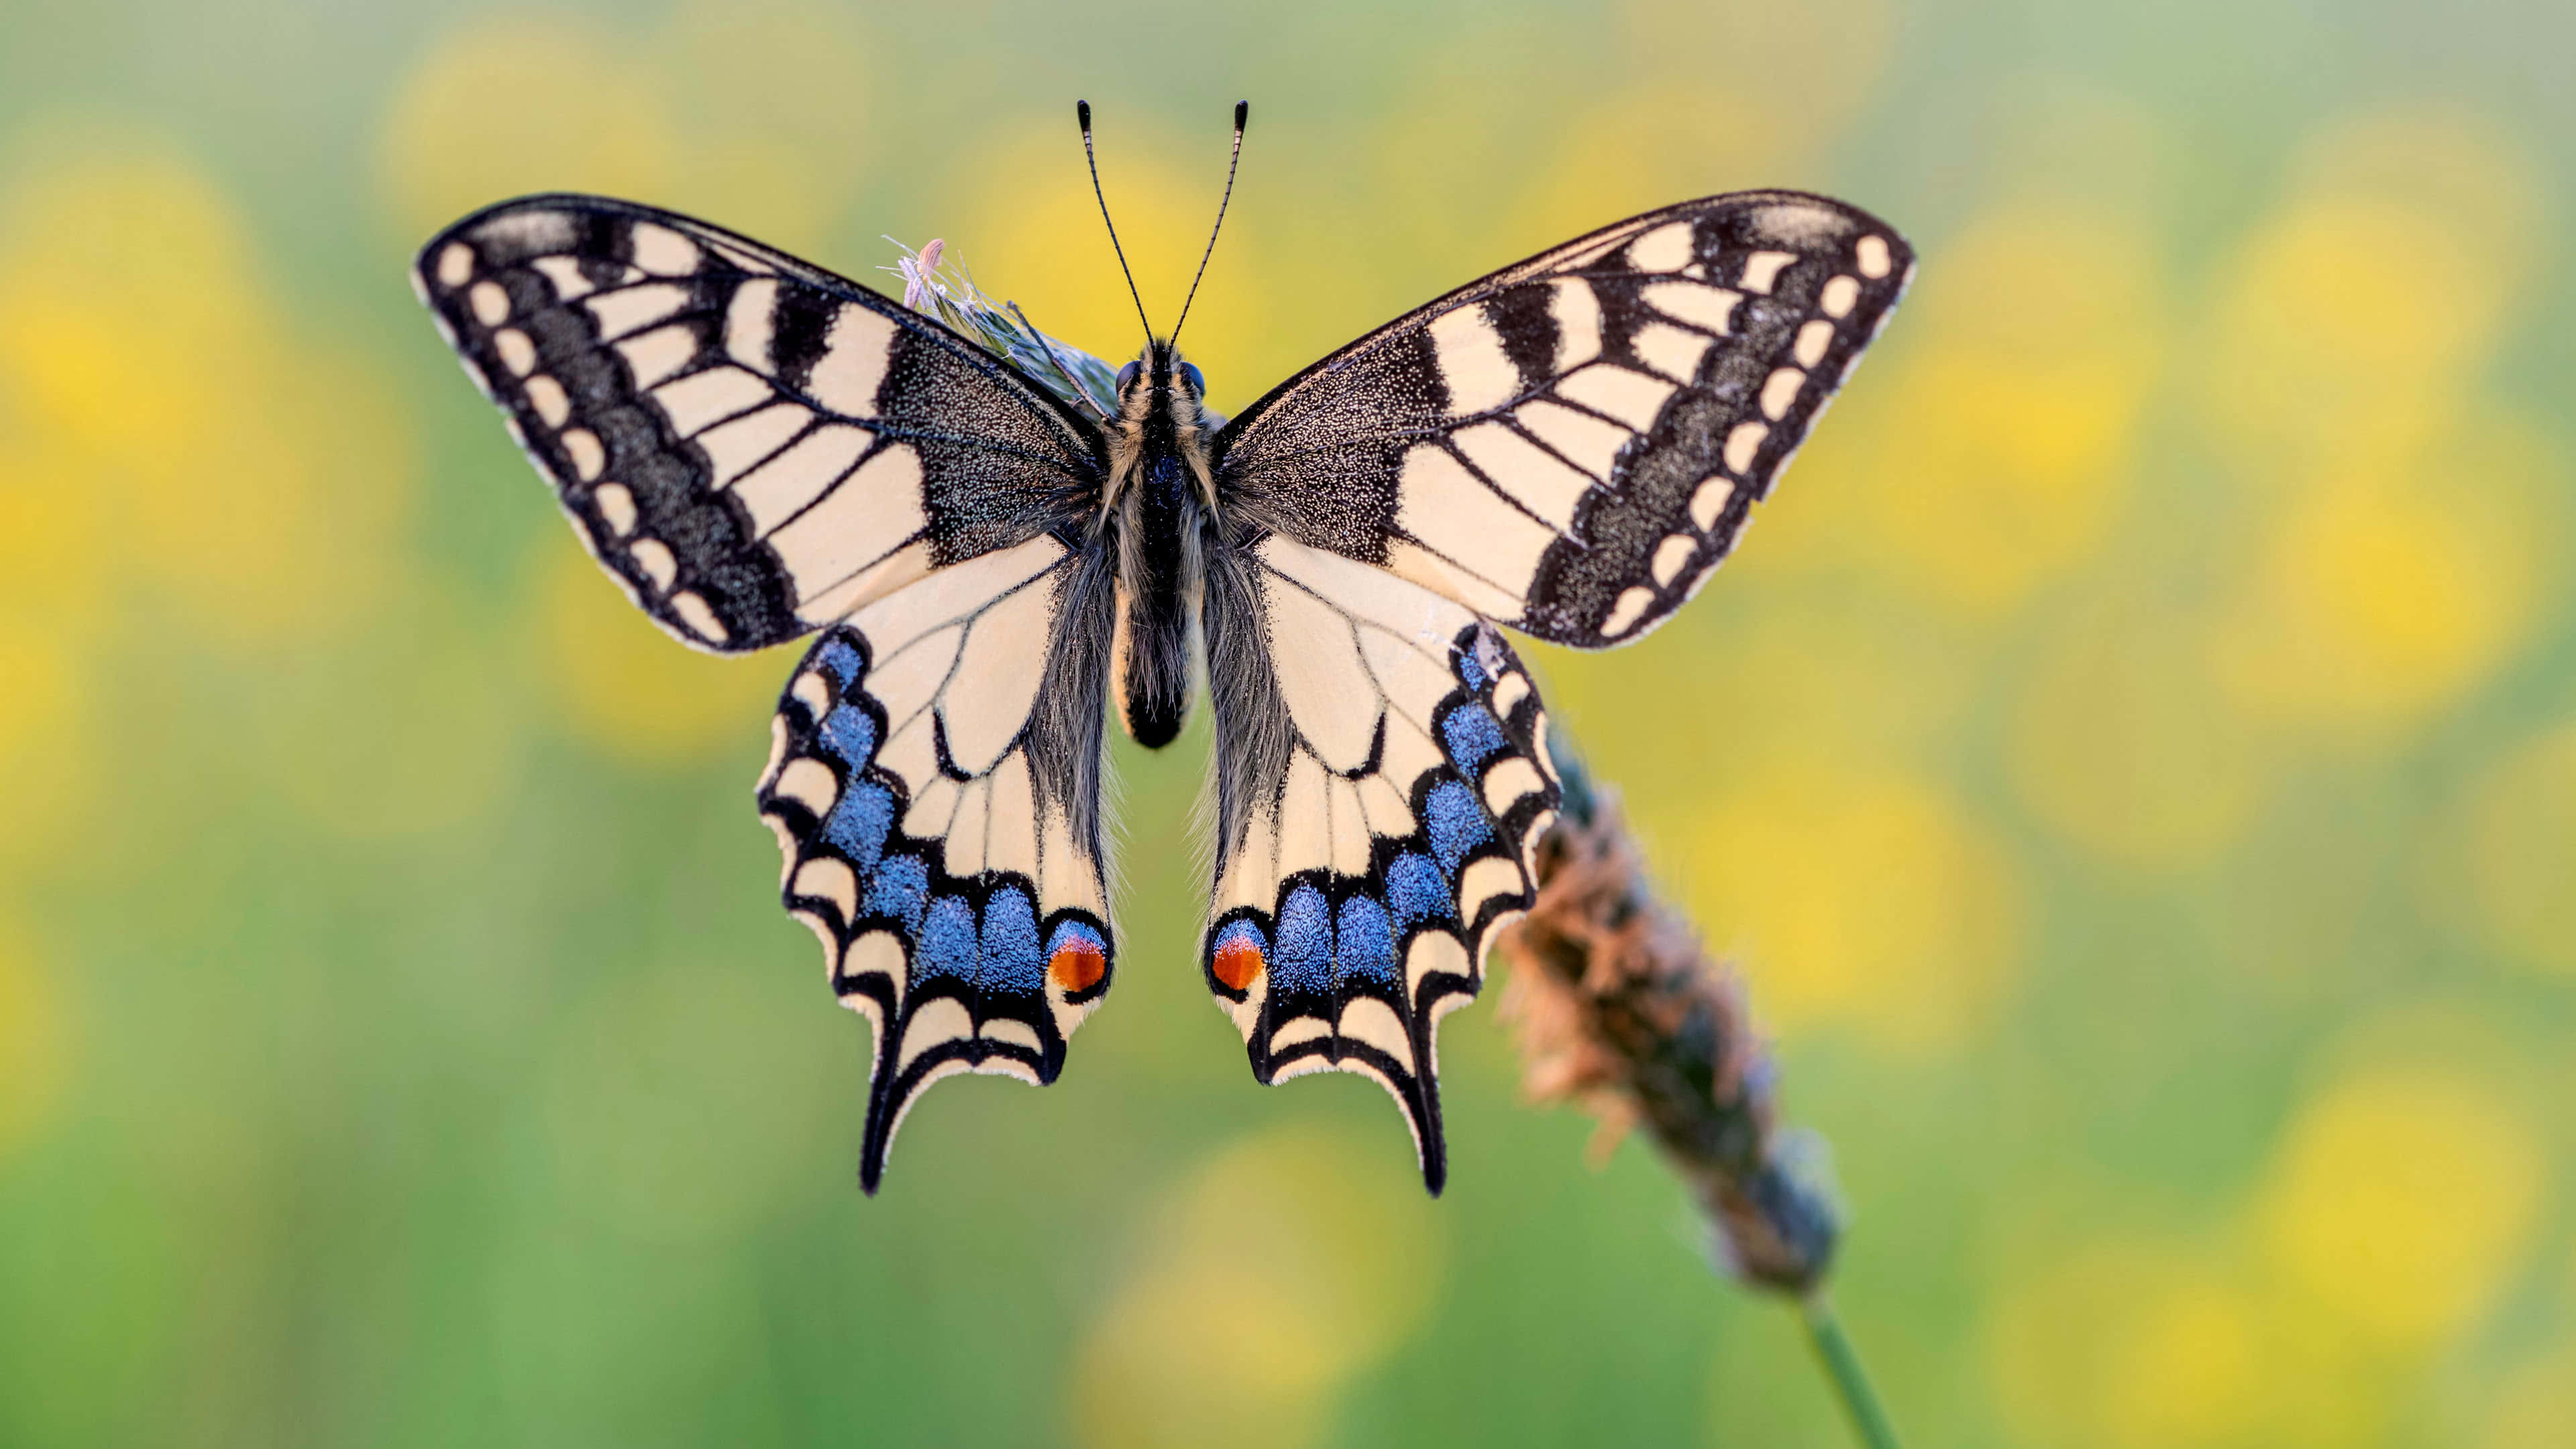 "a Stunning 4k Butterfly In Fabulous Natural Colors" Wallpaper